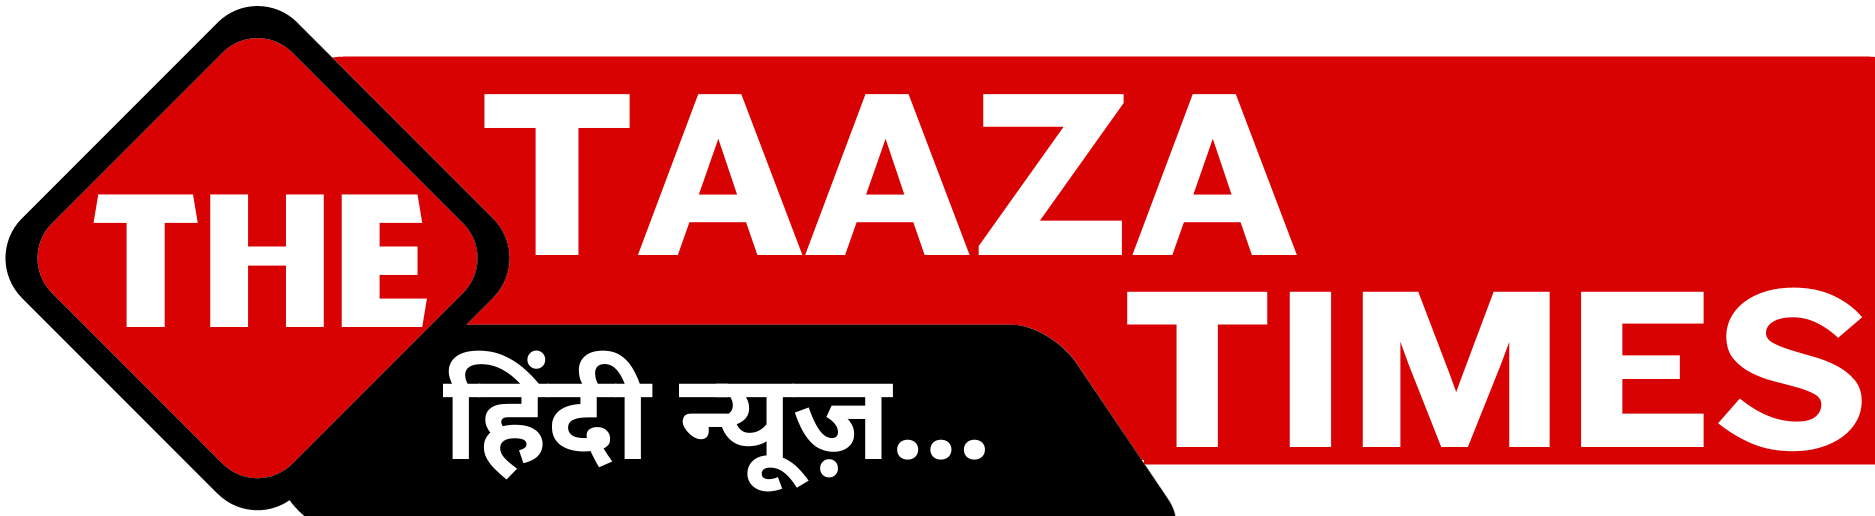 Education, Bollywood and Business News in Hindi: The Taaza Times